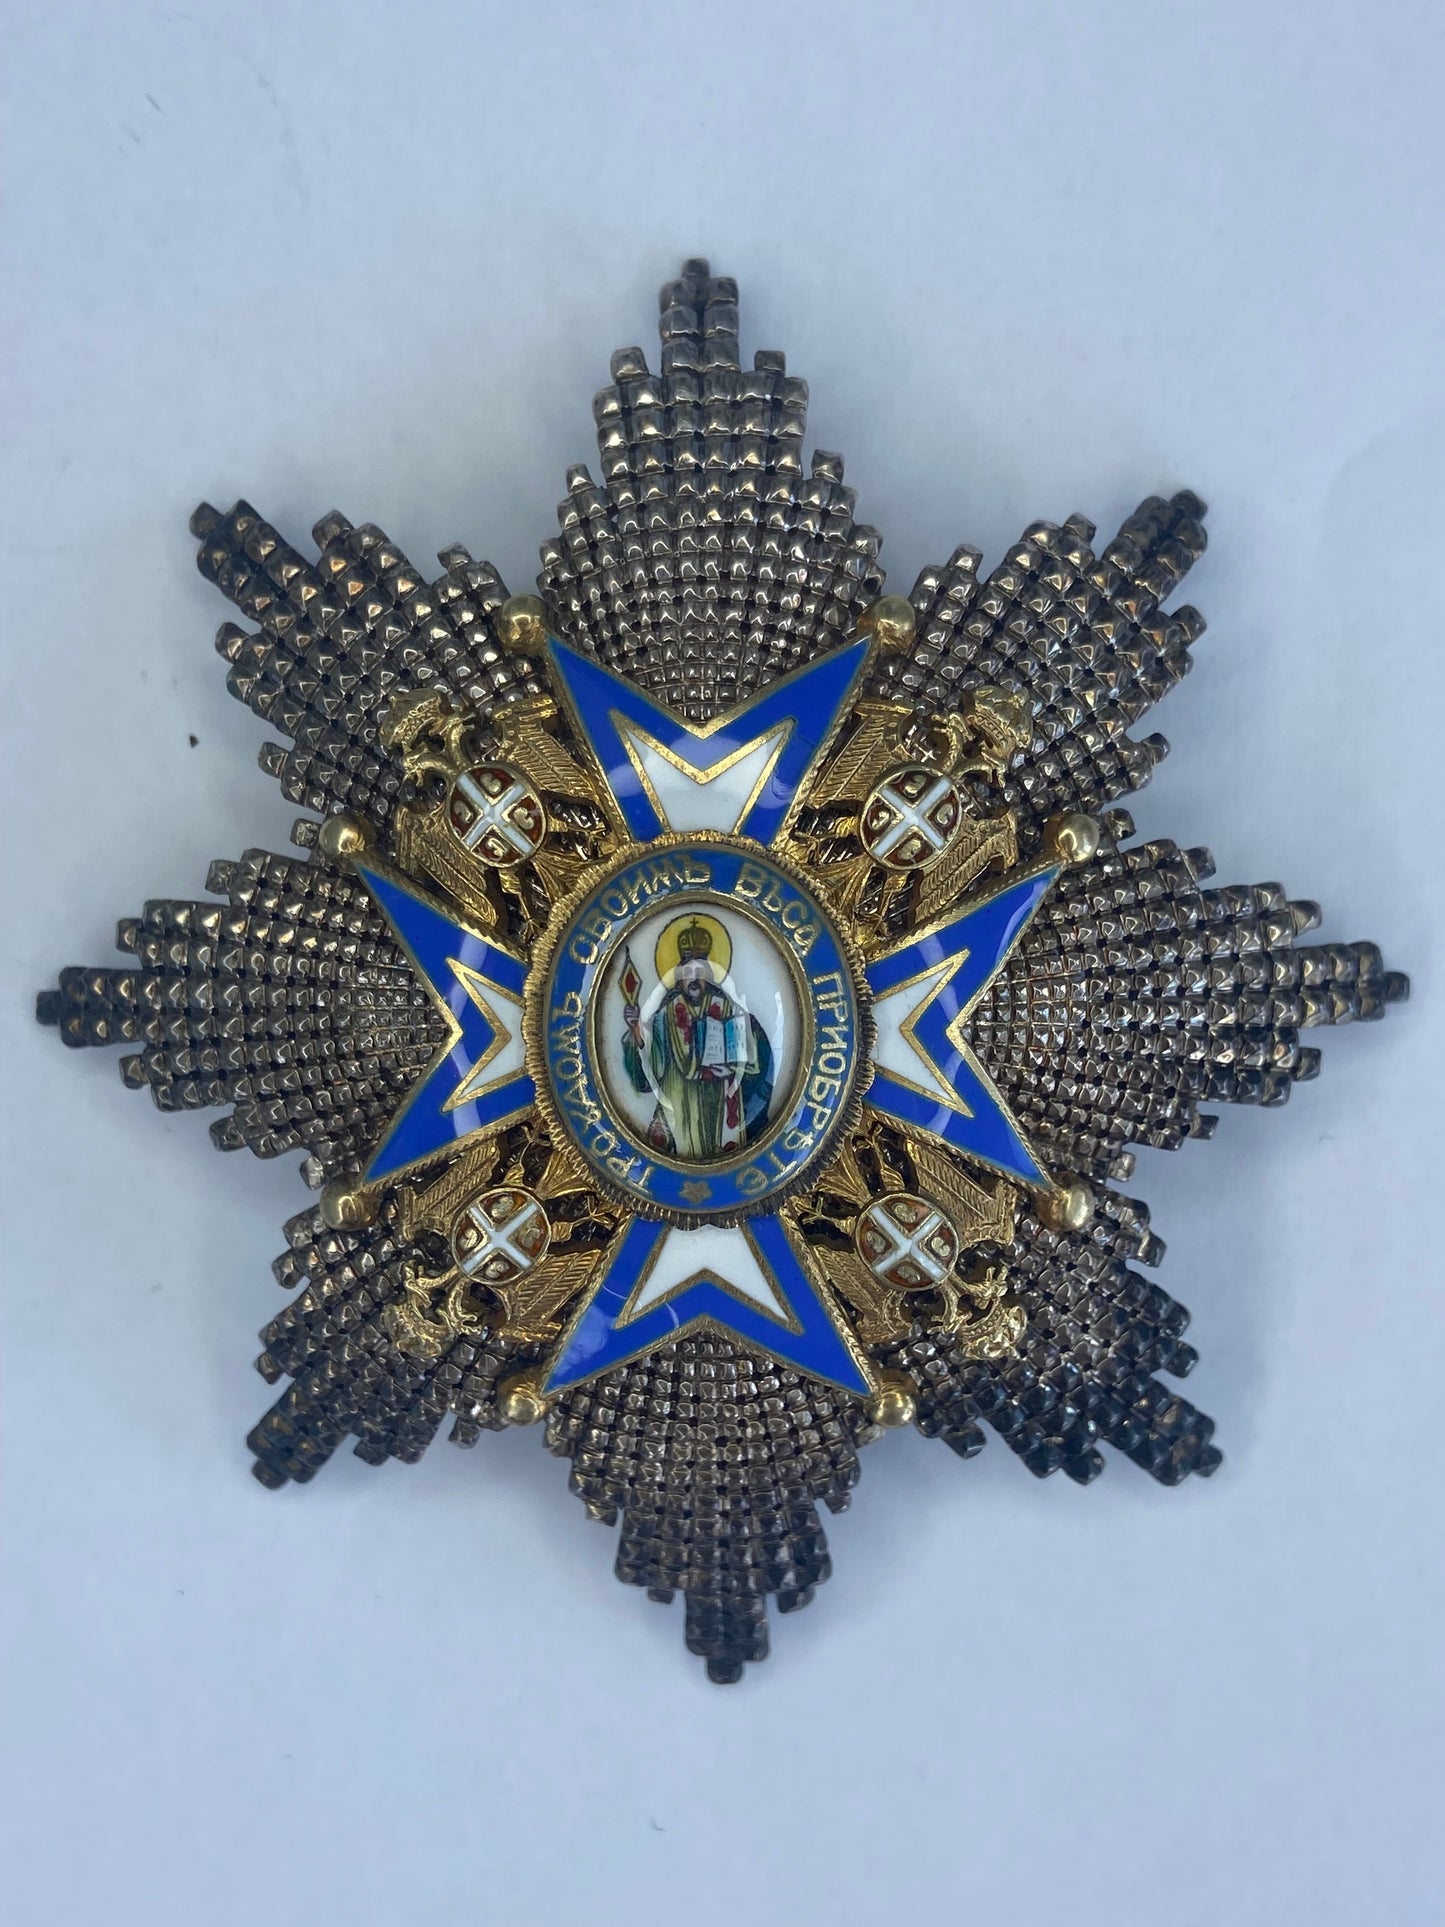 SERBIA ORDER OF SAINT SAVA GRADE OFFICER GRADE NECK BADGE AND BREAST STAR. TYPE 3. BOXED.